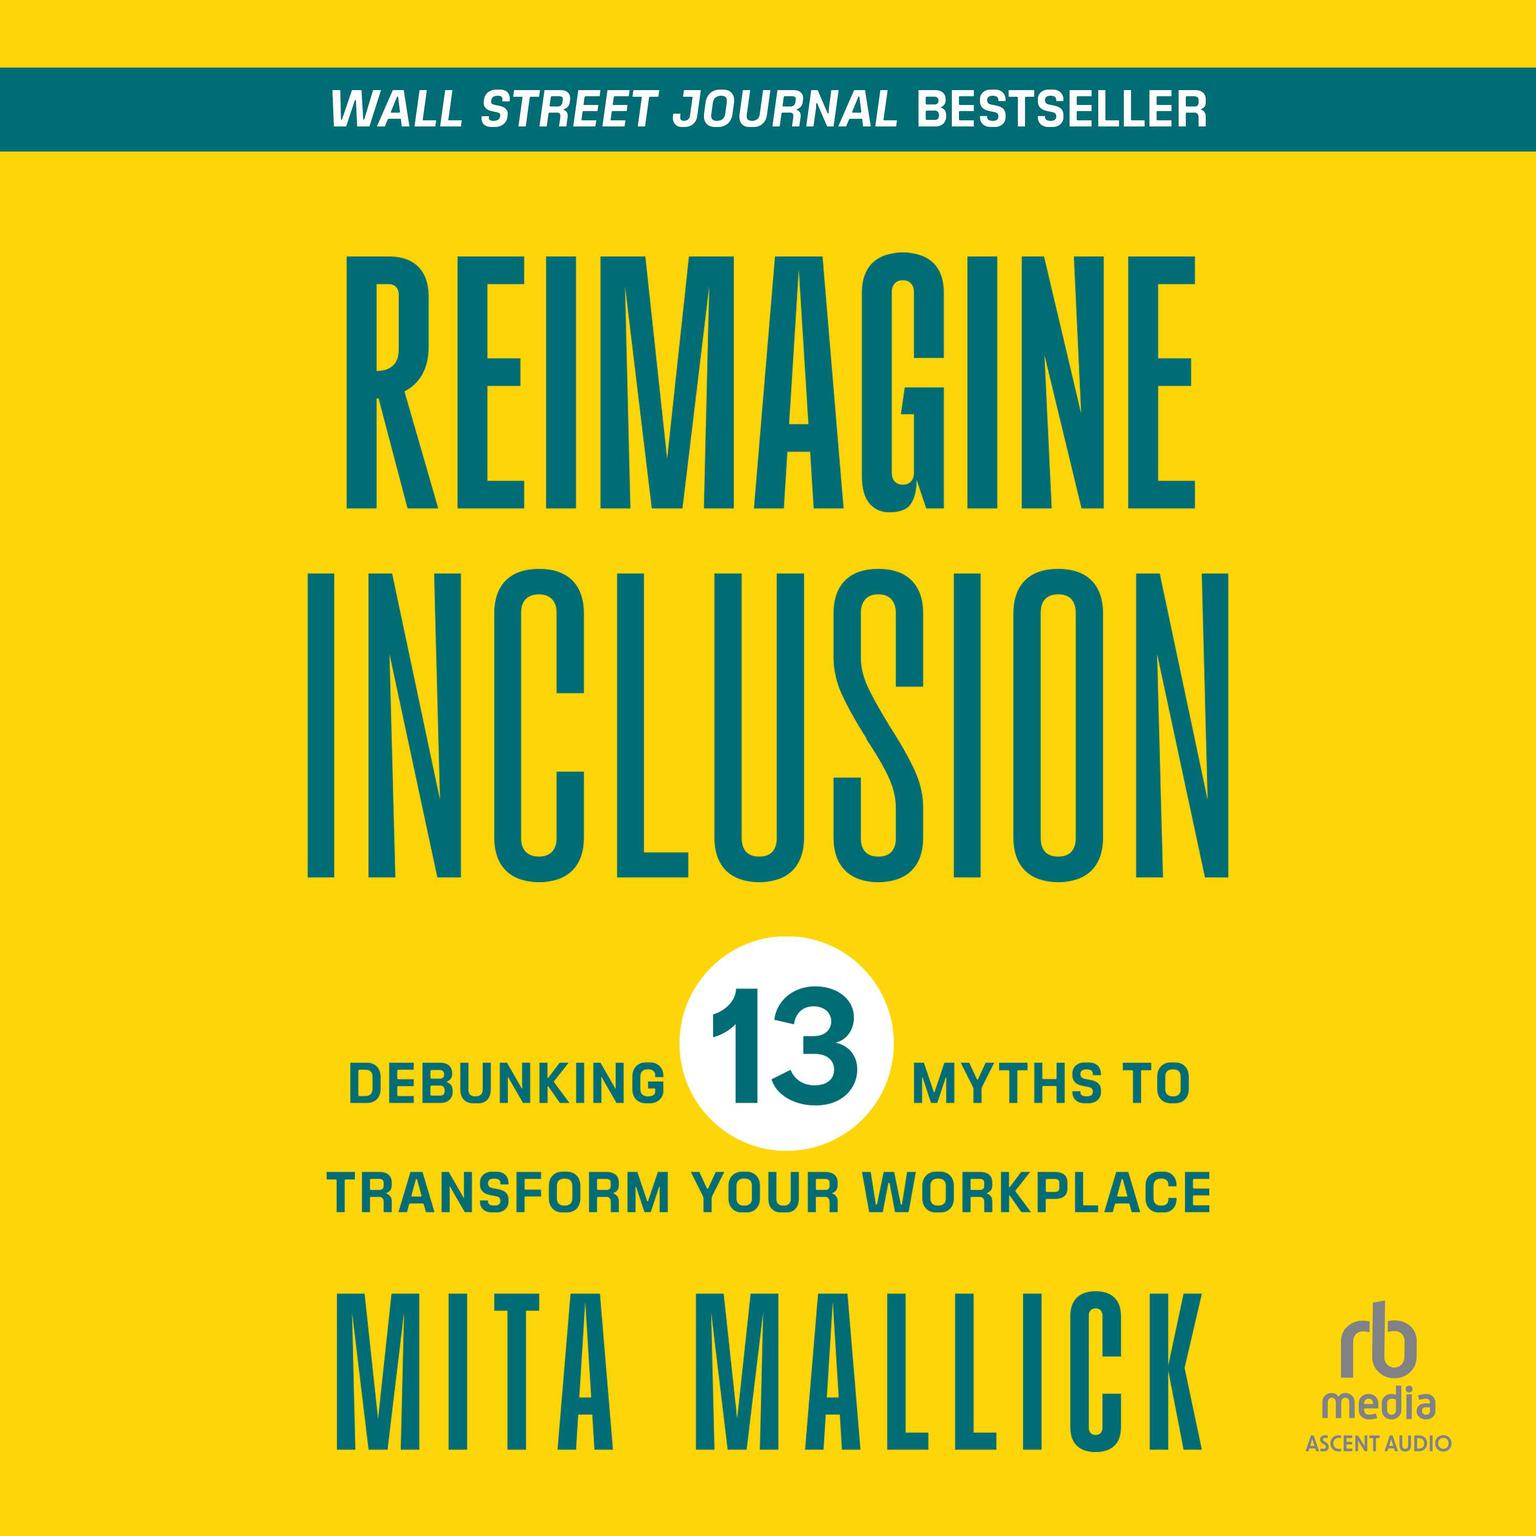 Reimagine Inclusion: Debunking 13 Myths To Transform Your Workplace Audiobook, by Mita Mallick